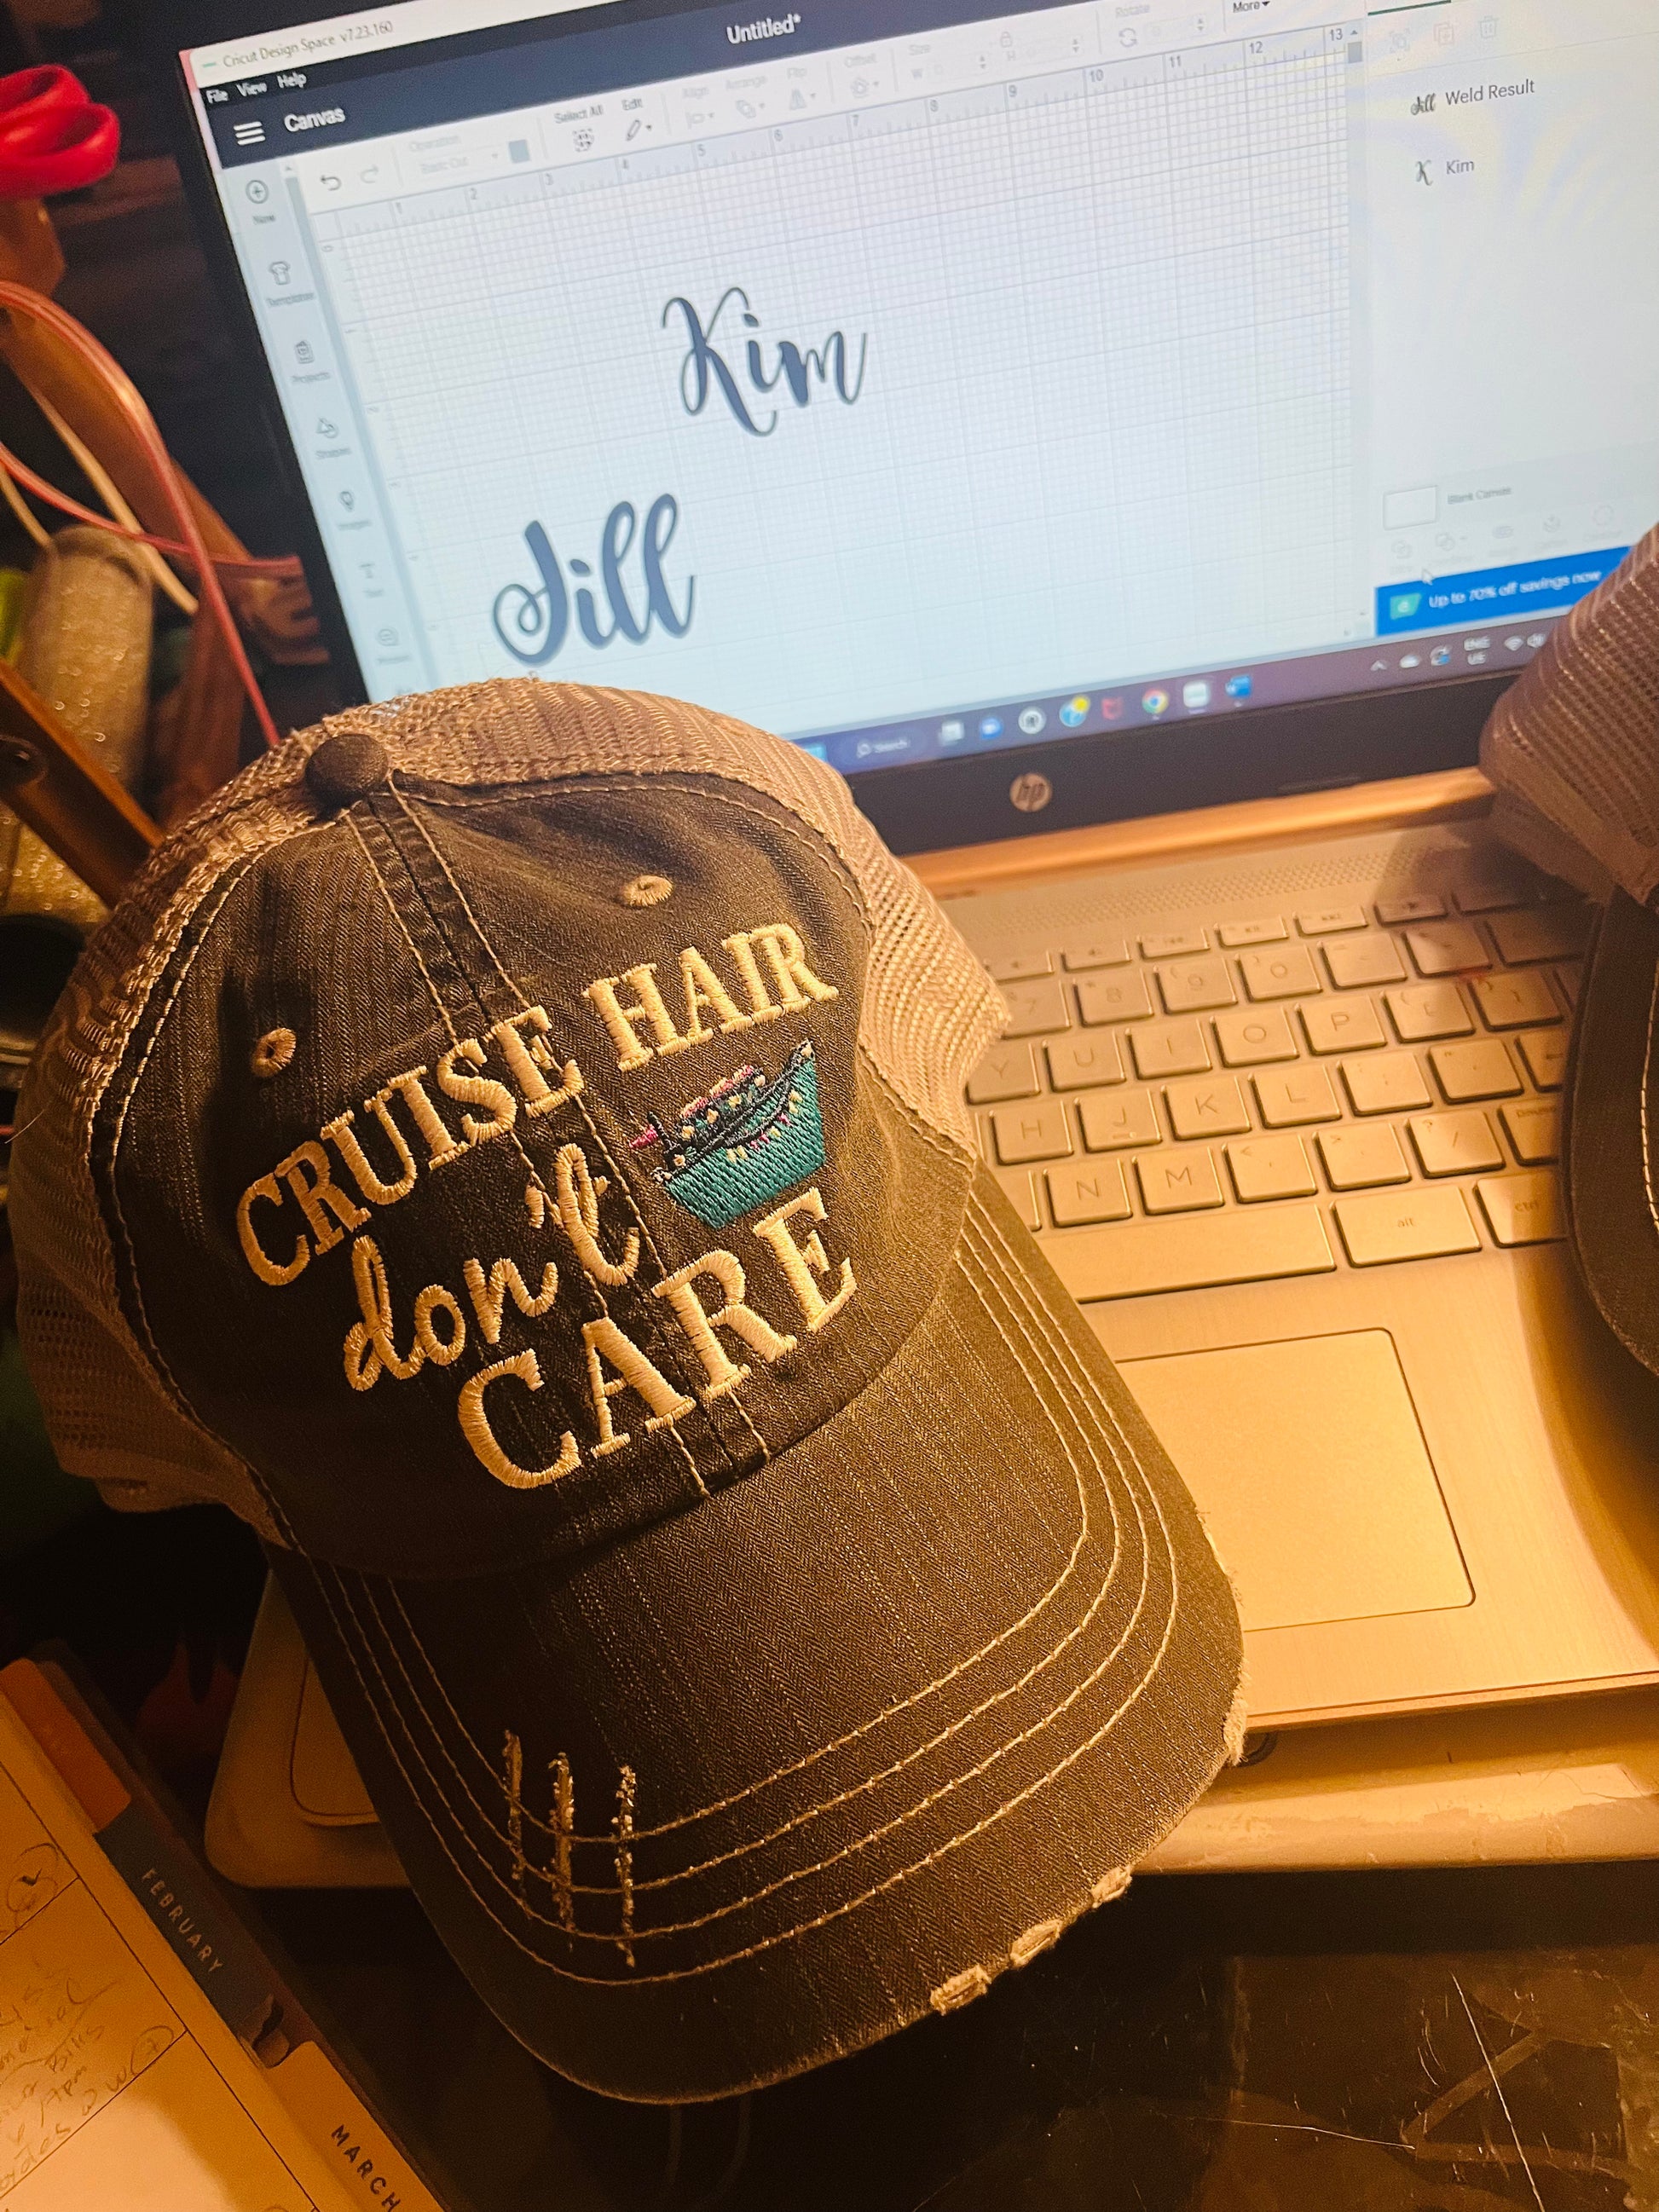 Cruise hats Cruise hair dont care Embroidered distressed unisex trucker caps - Stacy's Pink Martini Boutique